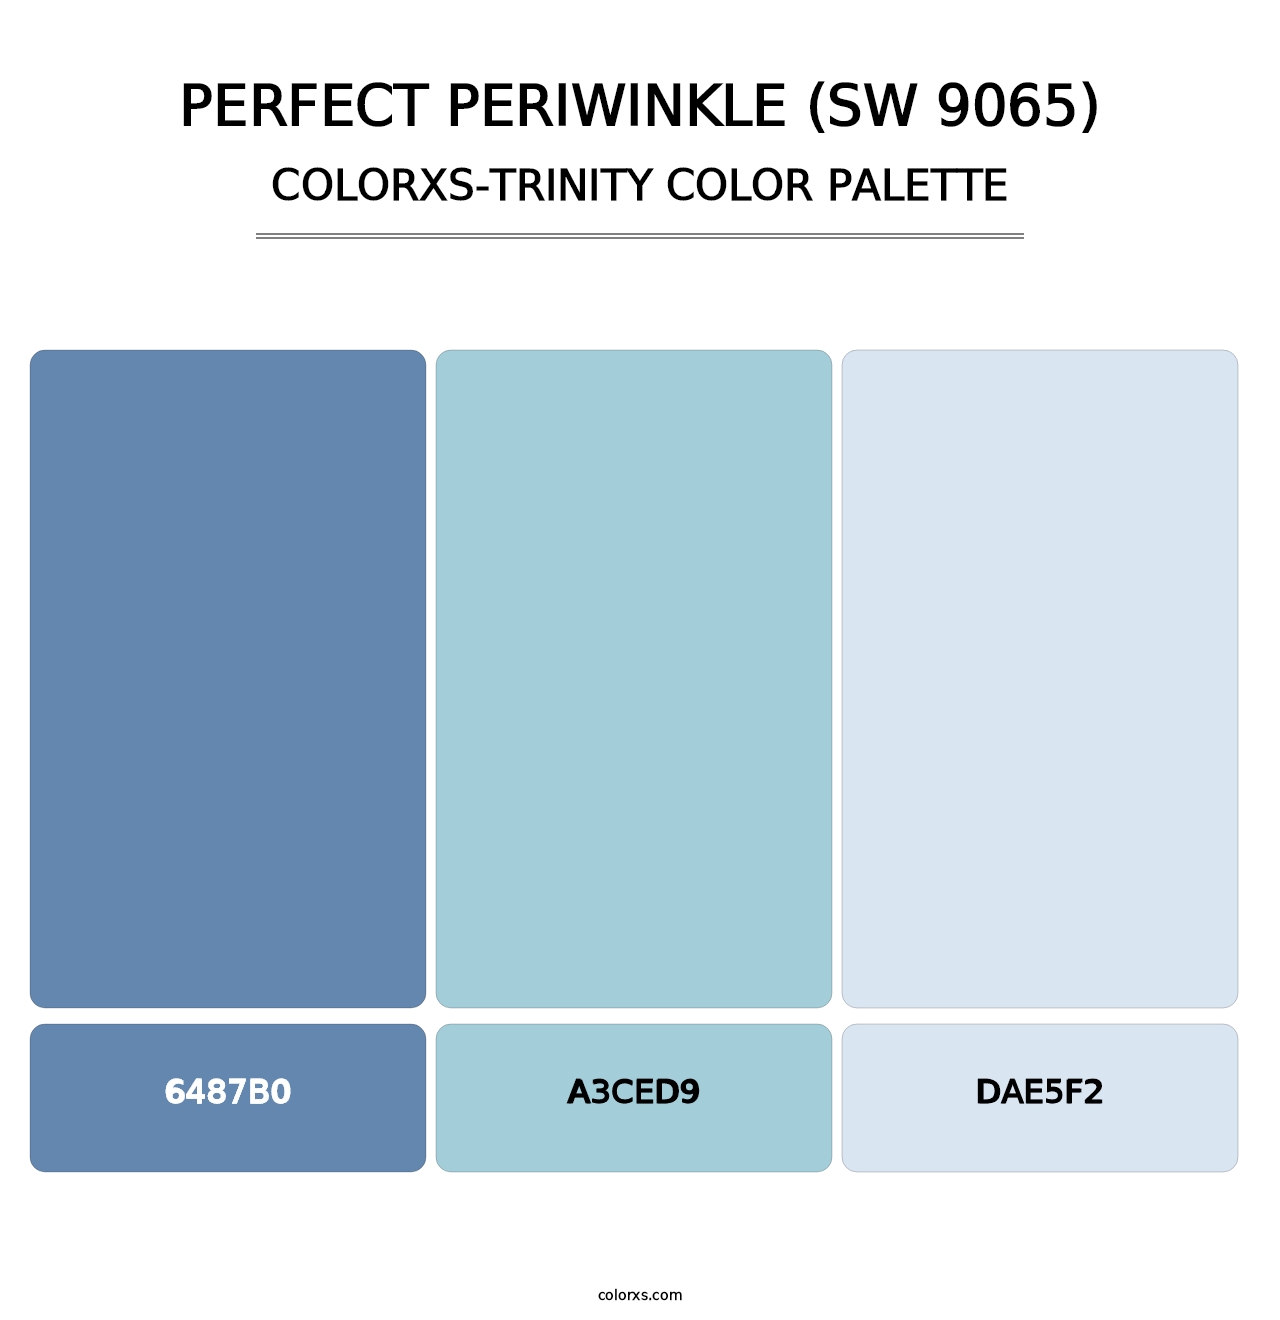 Perfect Periwinkle (SW 9065) - Colorxs Trinity Palette